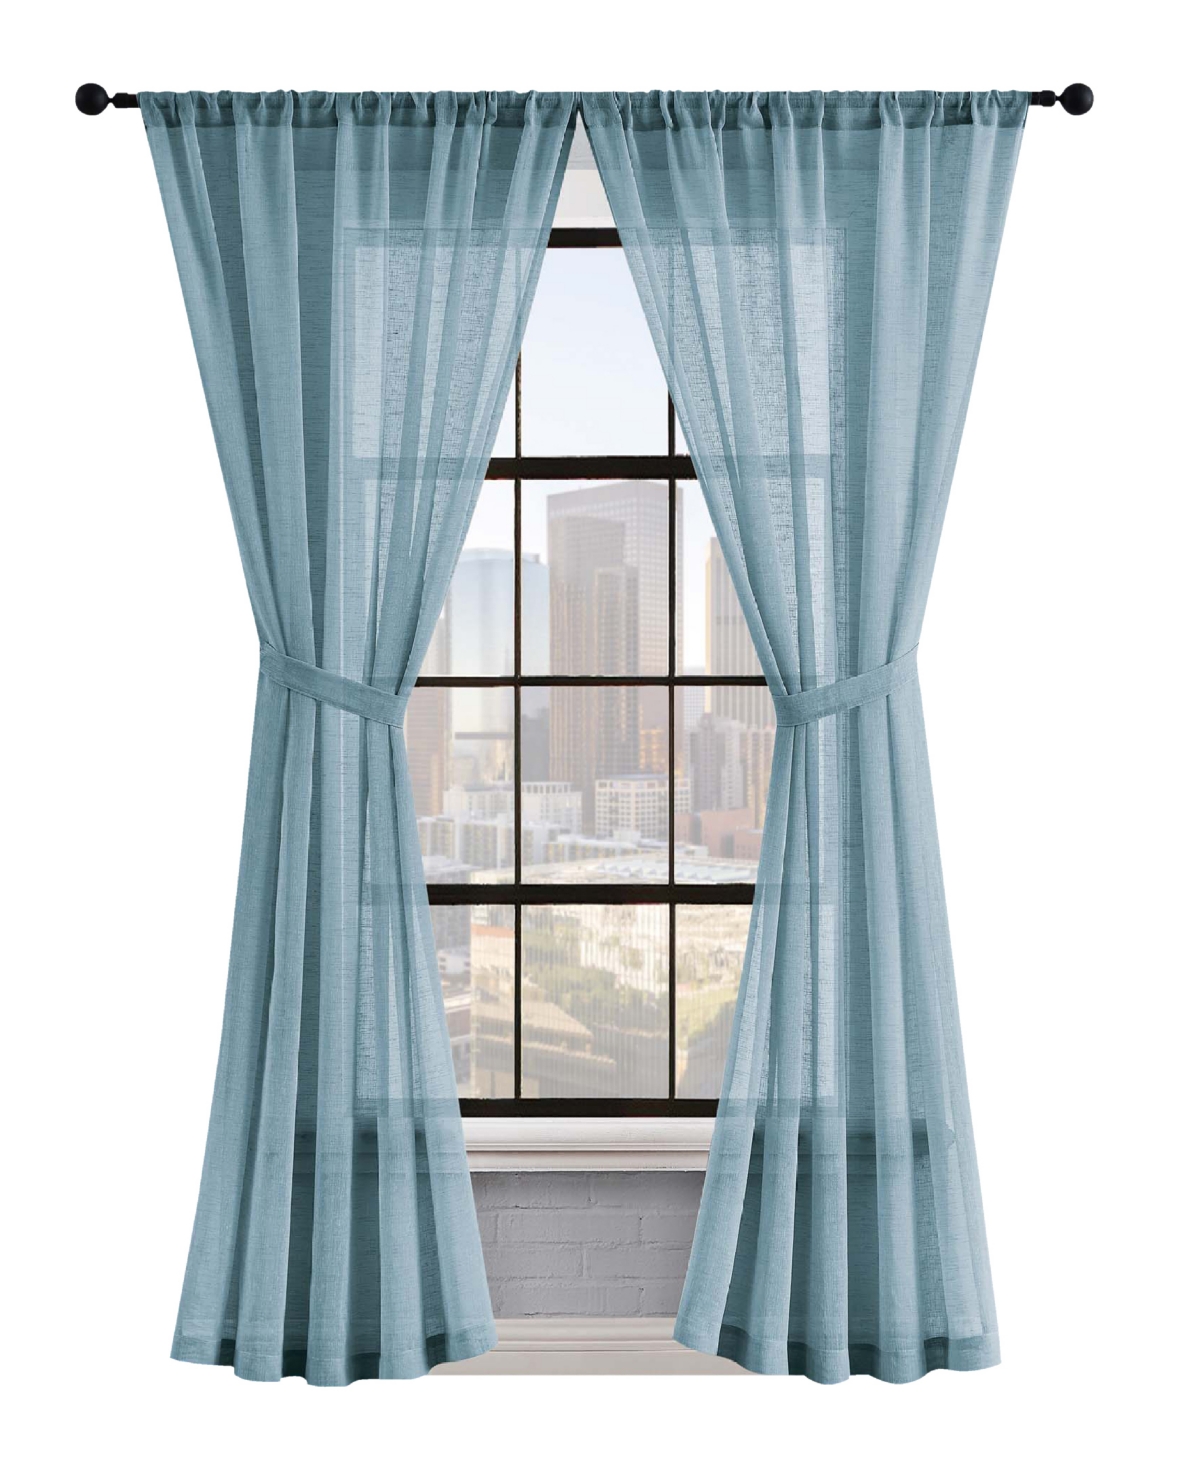 Lucky Brand Onyx Textured Sheer Voile Light Filtering Rod Pocket Window Curtain Panel Pair With Tiebacks, 52" X In Denim Blue